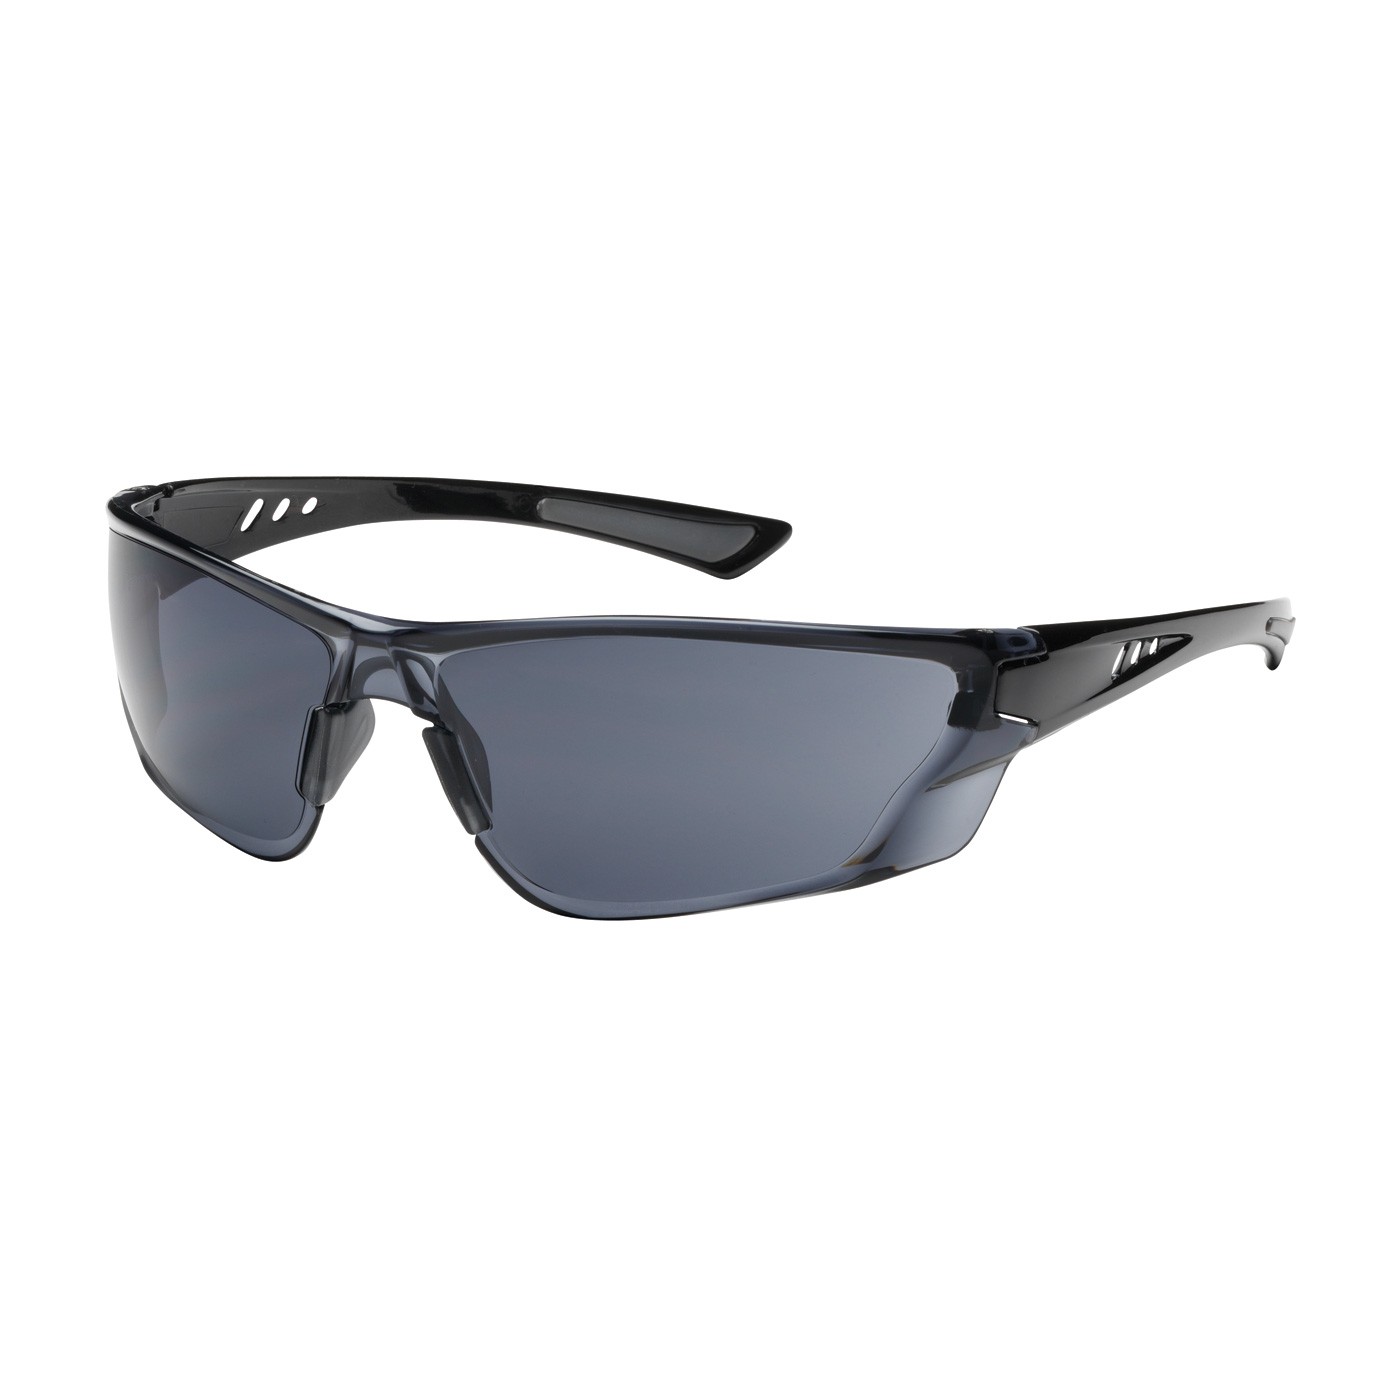 Recon™ Rimless Safety Glasses with Gloss Black Temple, Gray Lens and Anti-Scratch / Anti-Fog Coating  (#250-32-0021)